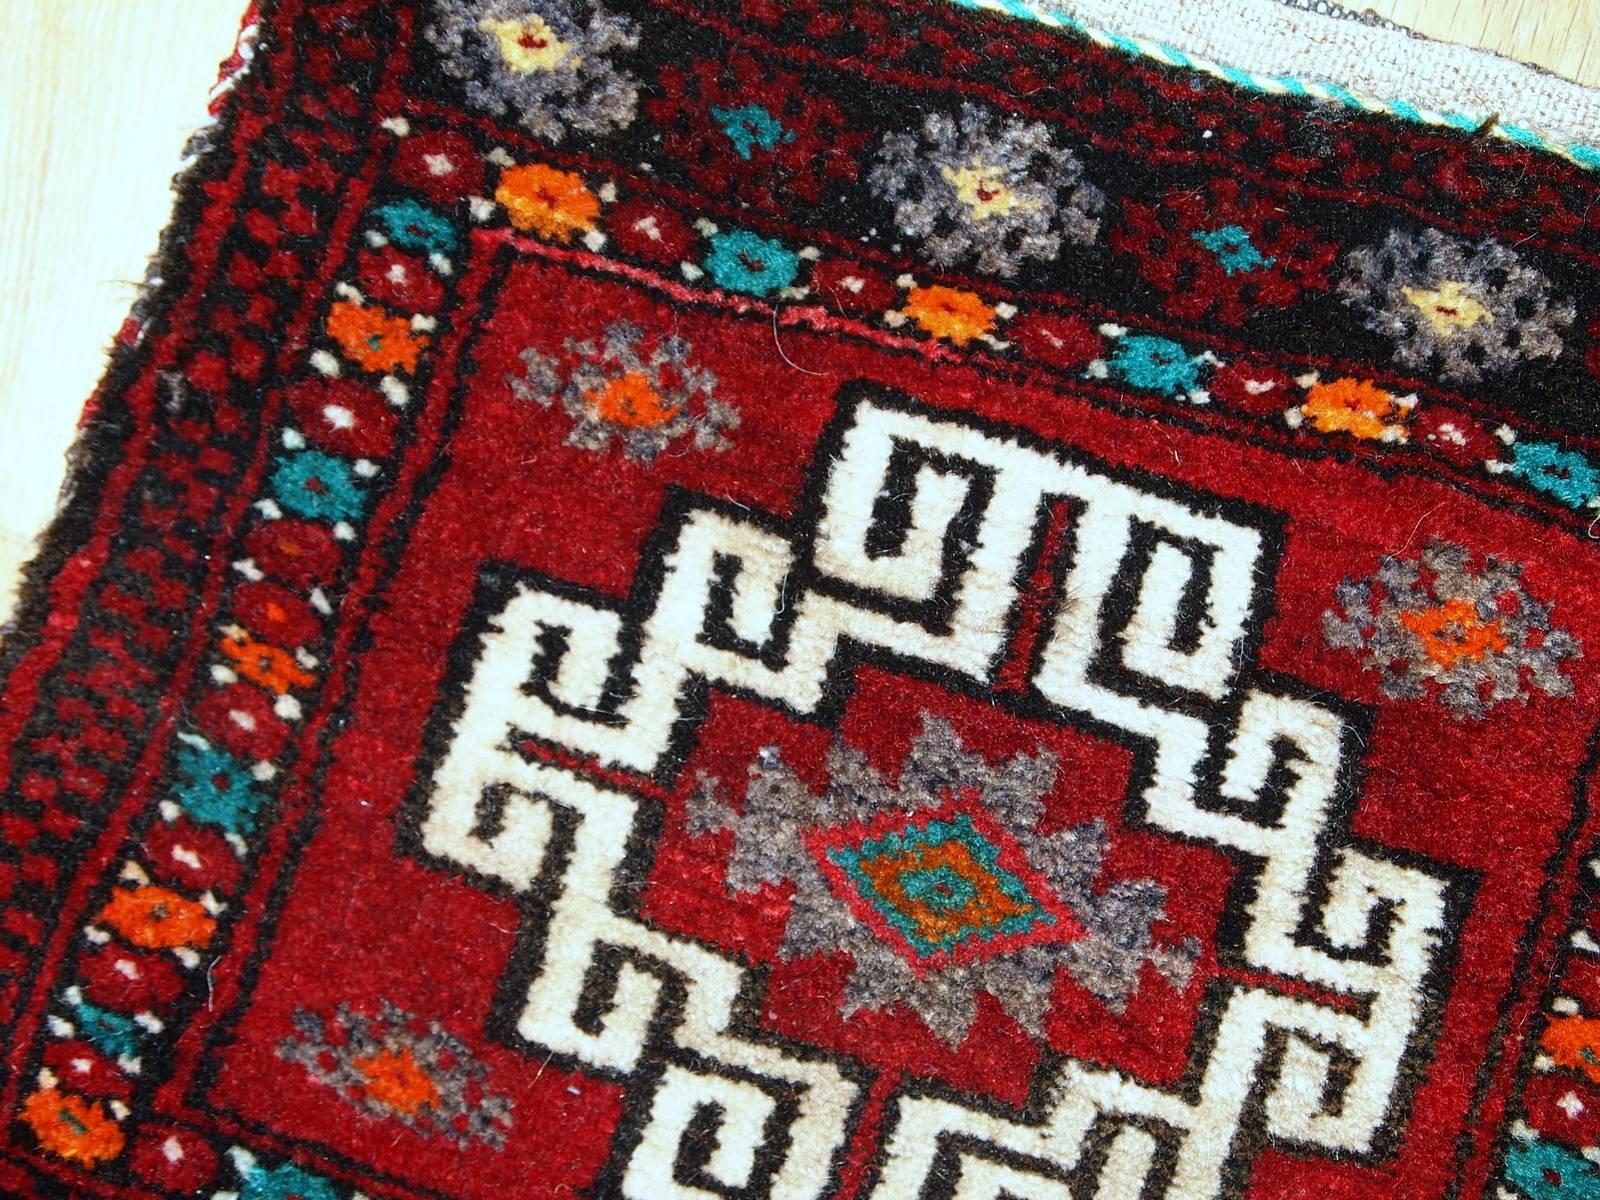 Handmade Turkish Anatolian bag in original condition. This bag has very deep colors from the front side of it- deep red for the field with some turquoise and orange details. The back side made out of stripped Kilim in red, gray and blue shades. The